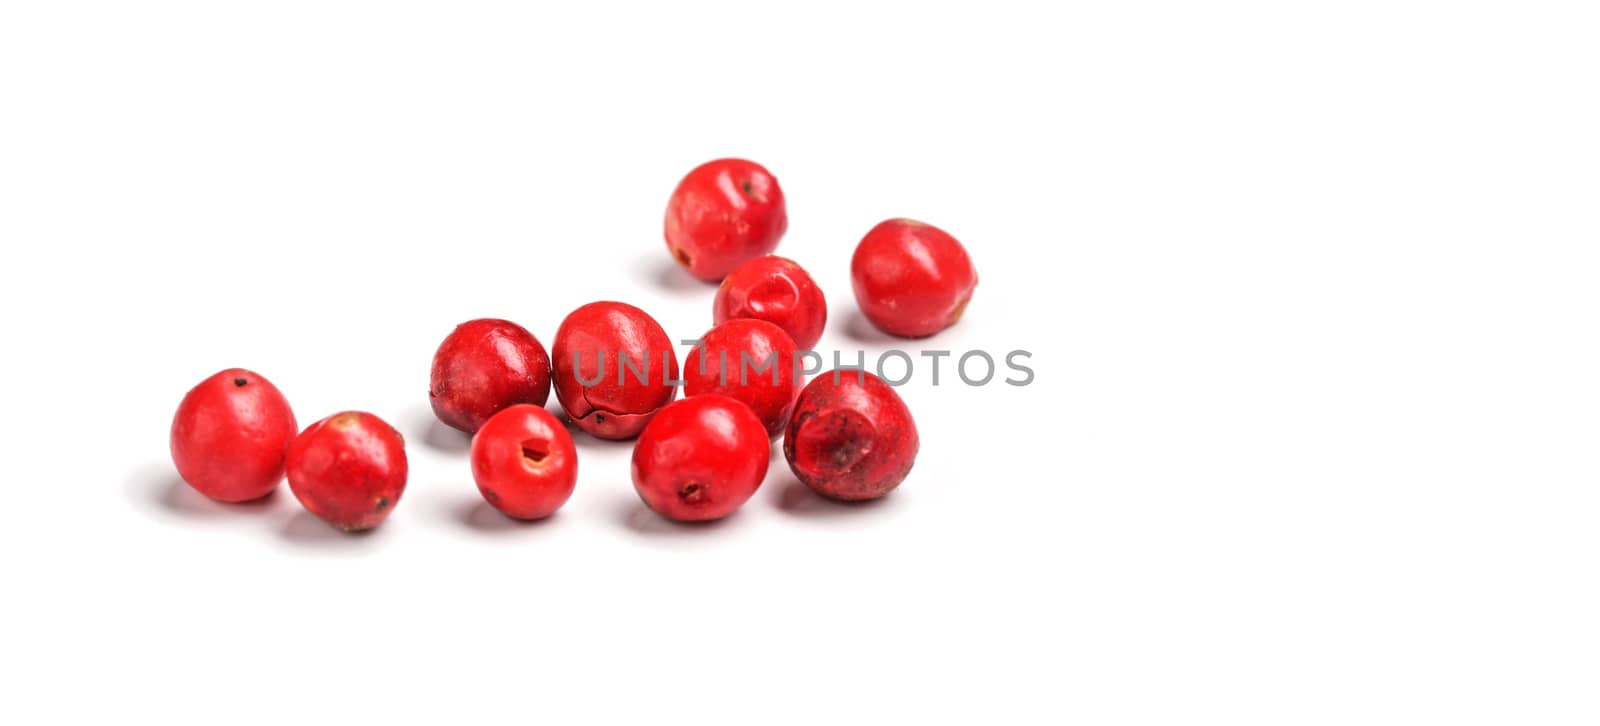 Red or pink peppercorns on board, closeup photo isolated with white background.